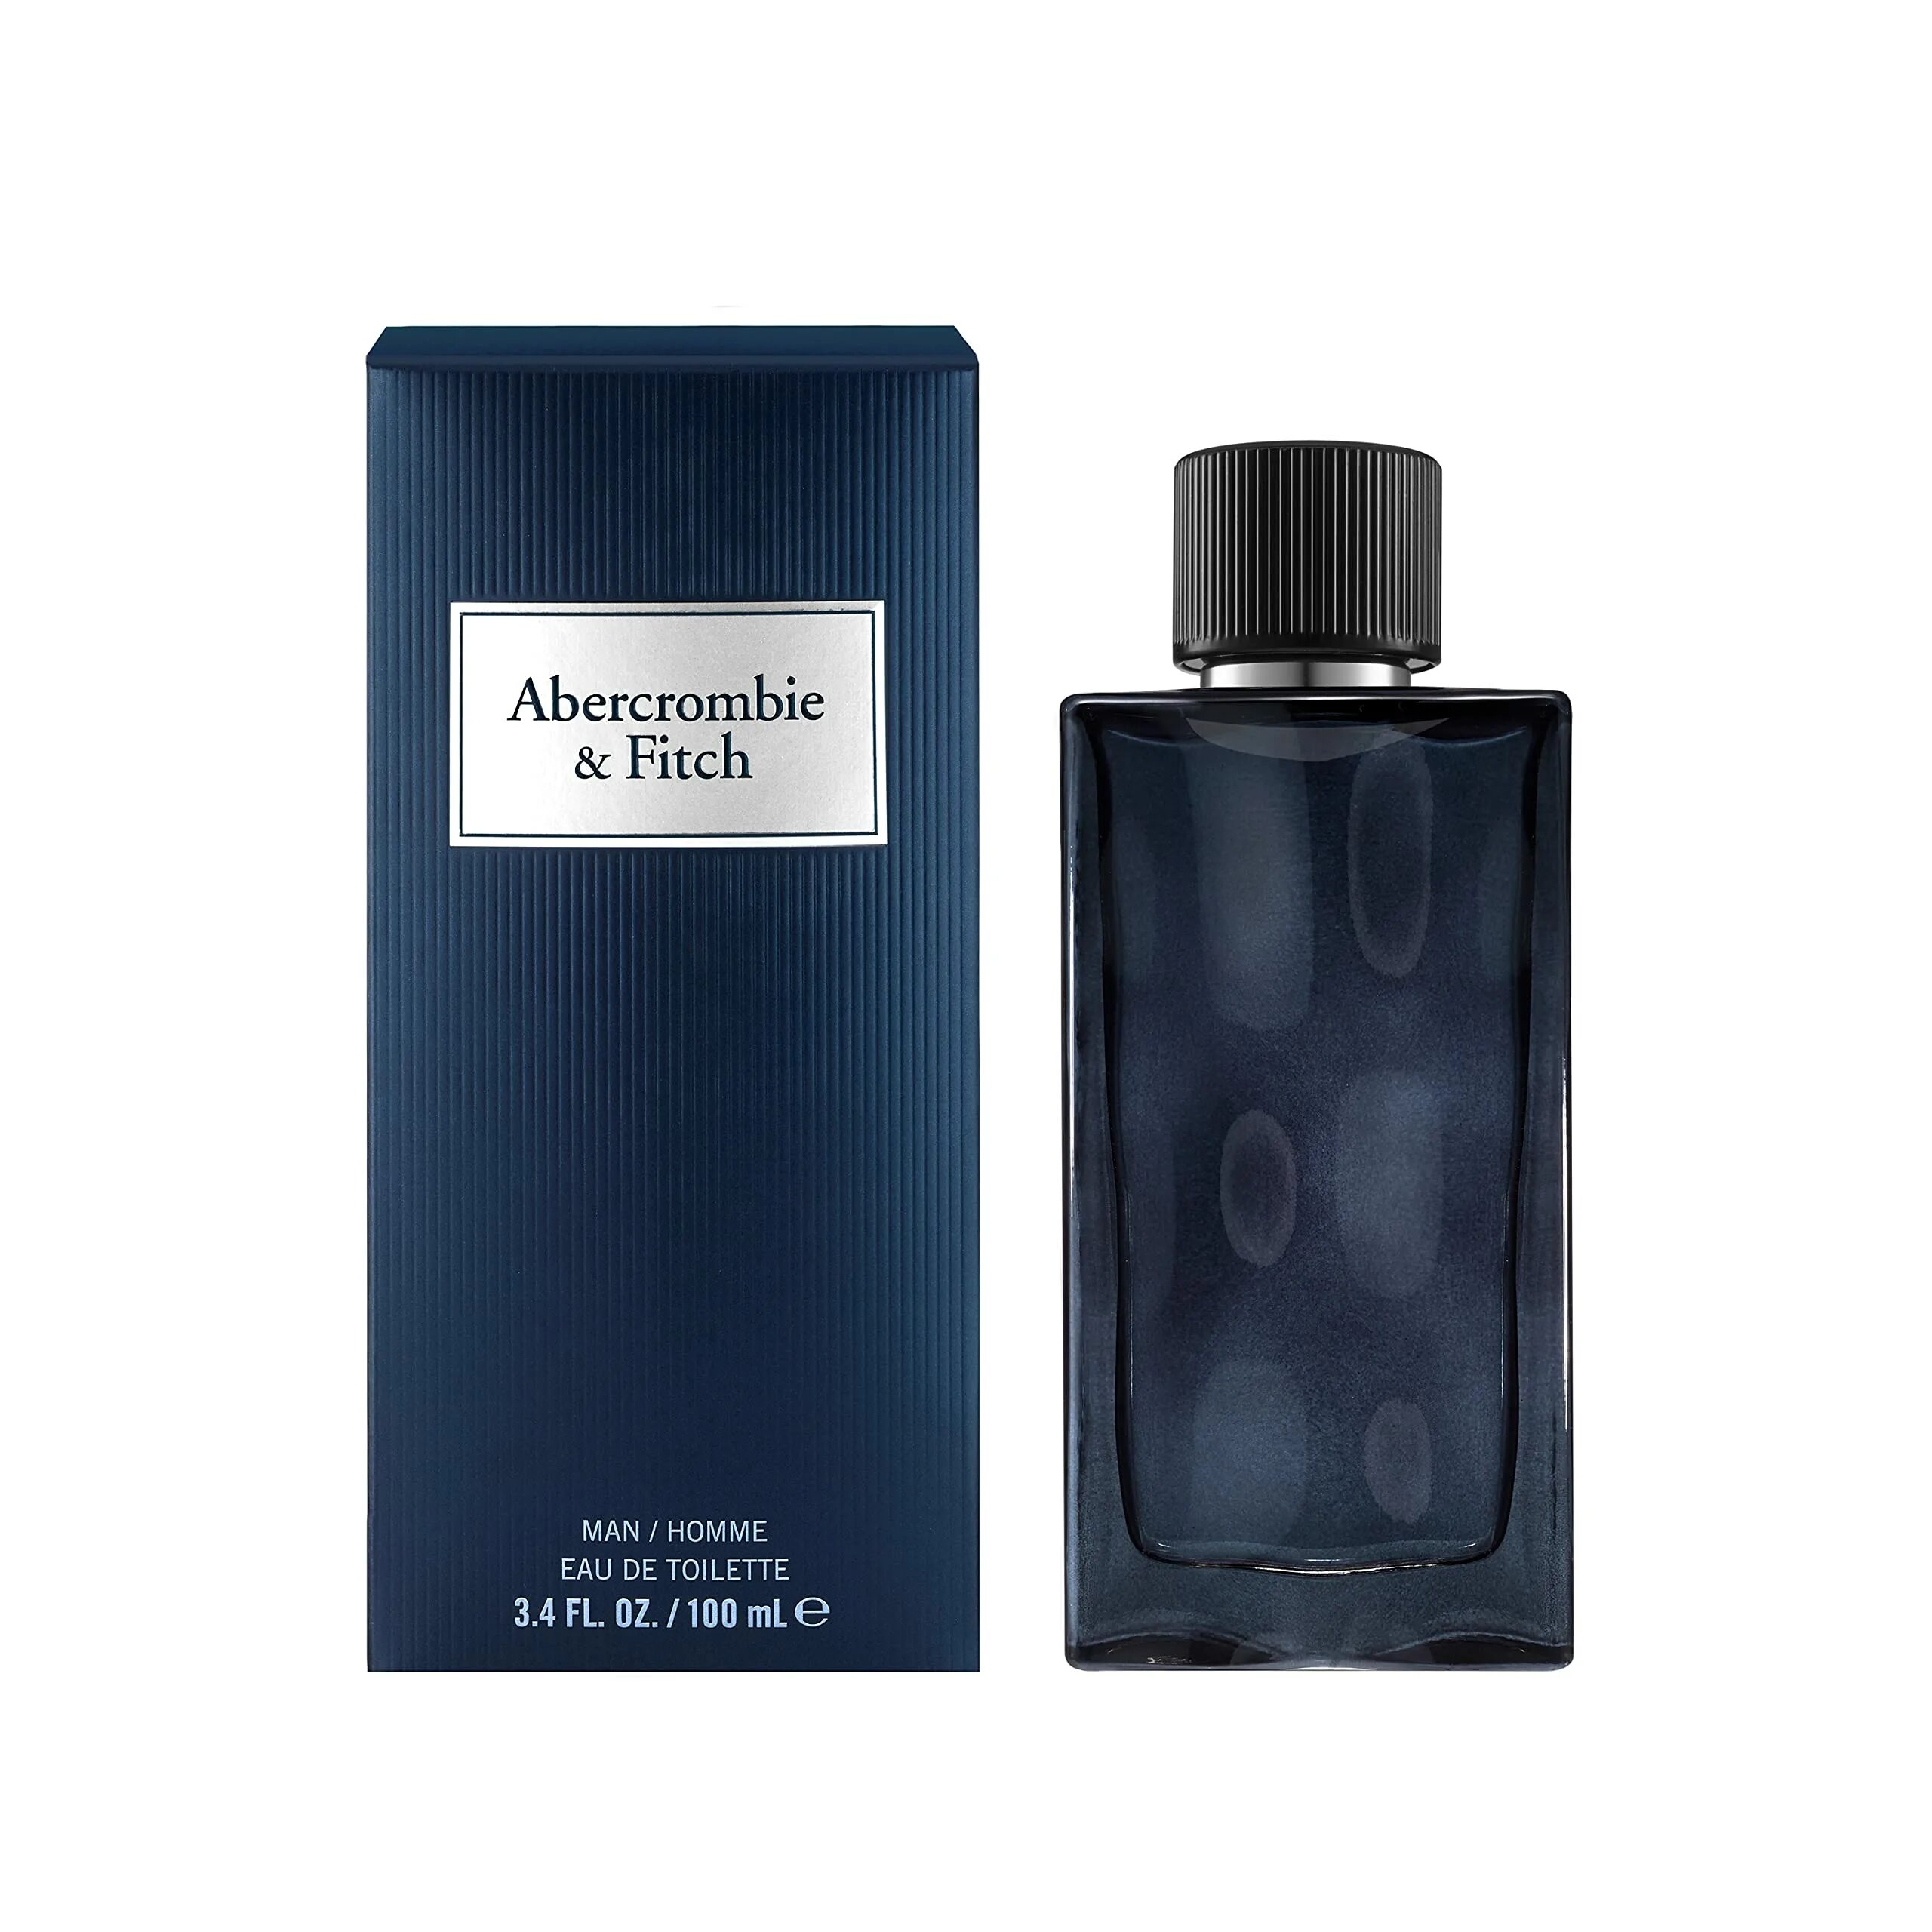 Abercrombie fitch first instinct blue. Abercrombie Fitch first Instinct for him туалетная вода мужская 50 мл. Abercrombie Fitch first Instinct Blue men. Abercrombie and Fitch first Instinct Blue for him 50 мл. Abercrombie & Fitch first Instinct Blue men 30ml EDT.